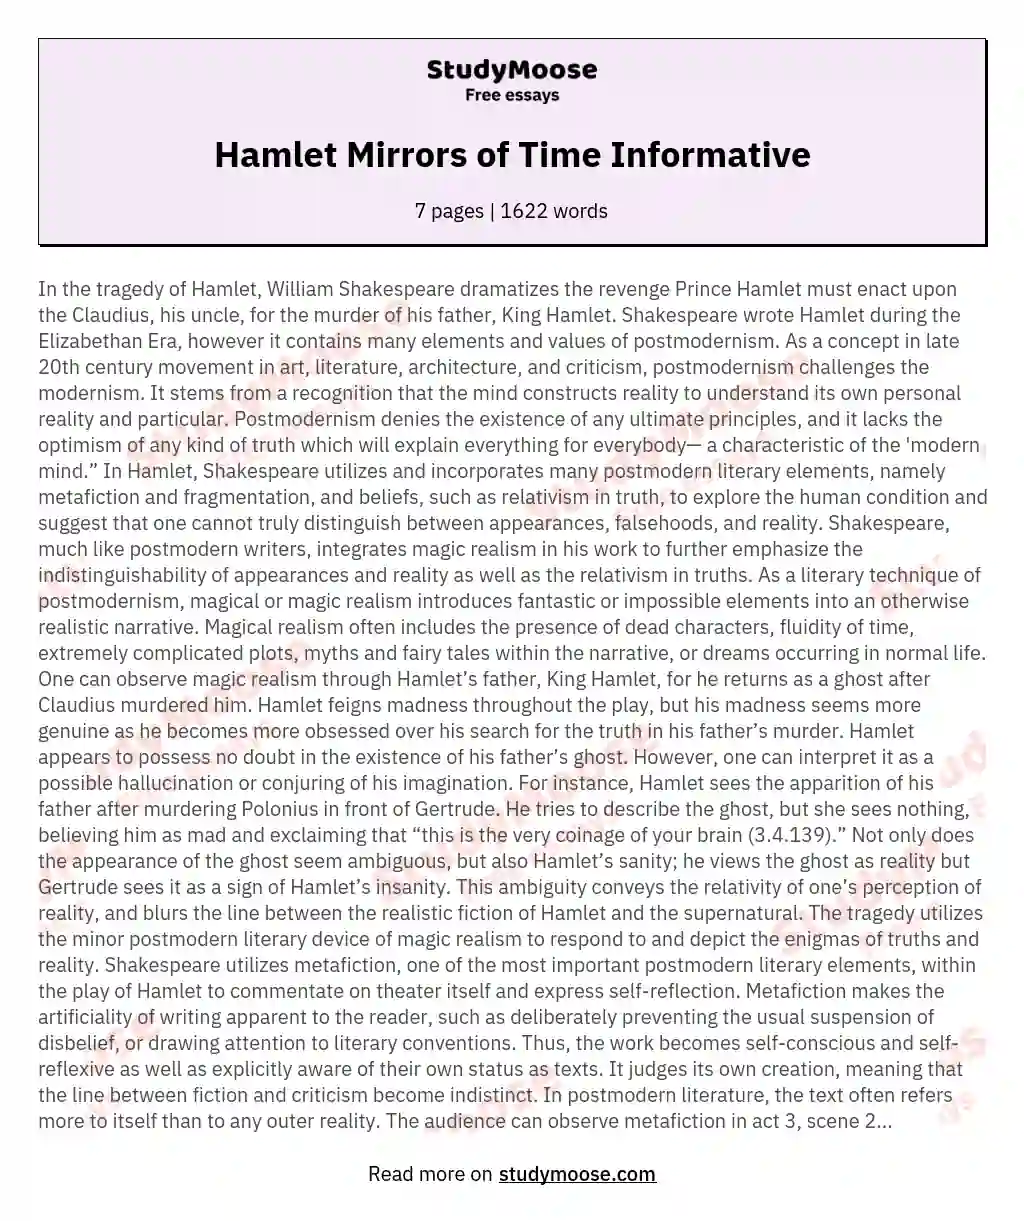 Hamlet Mirrors of Time Informative essay